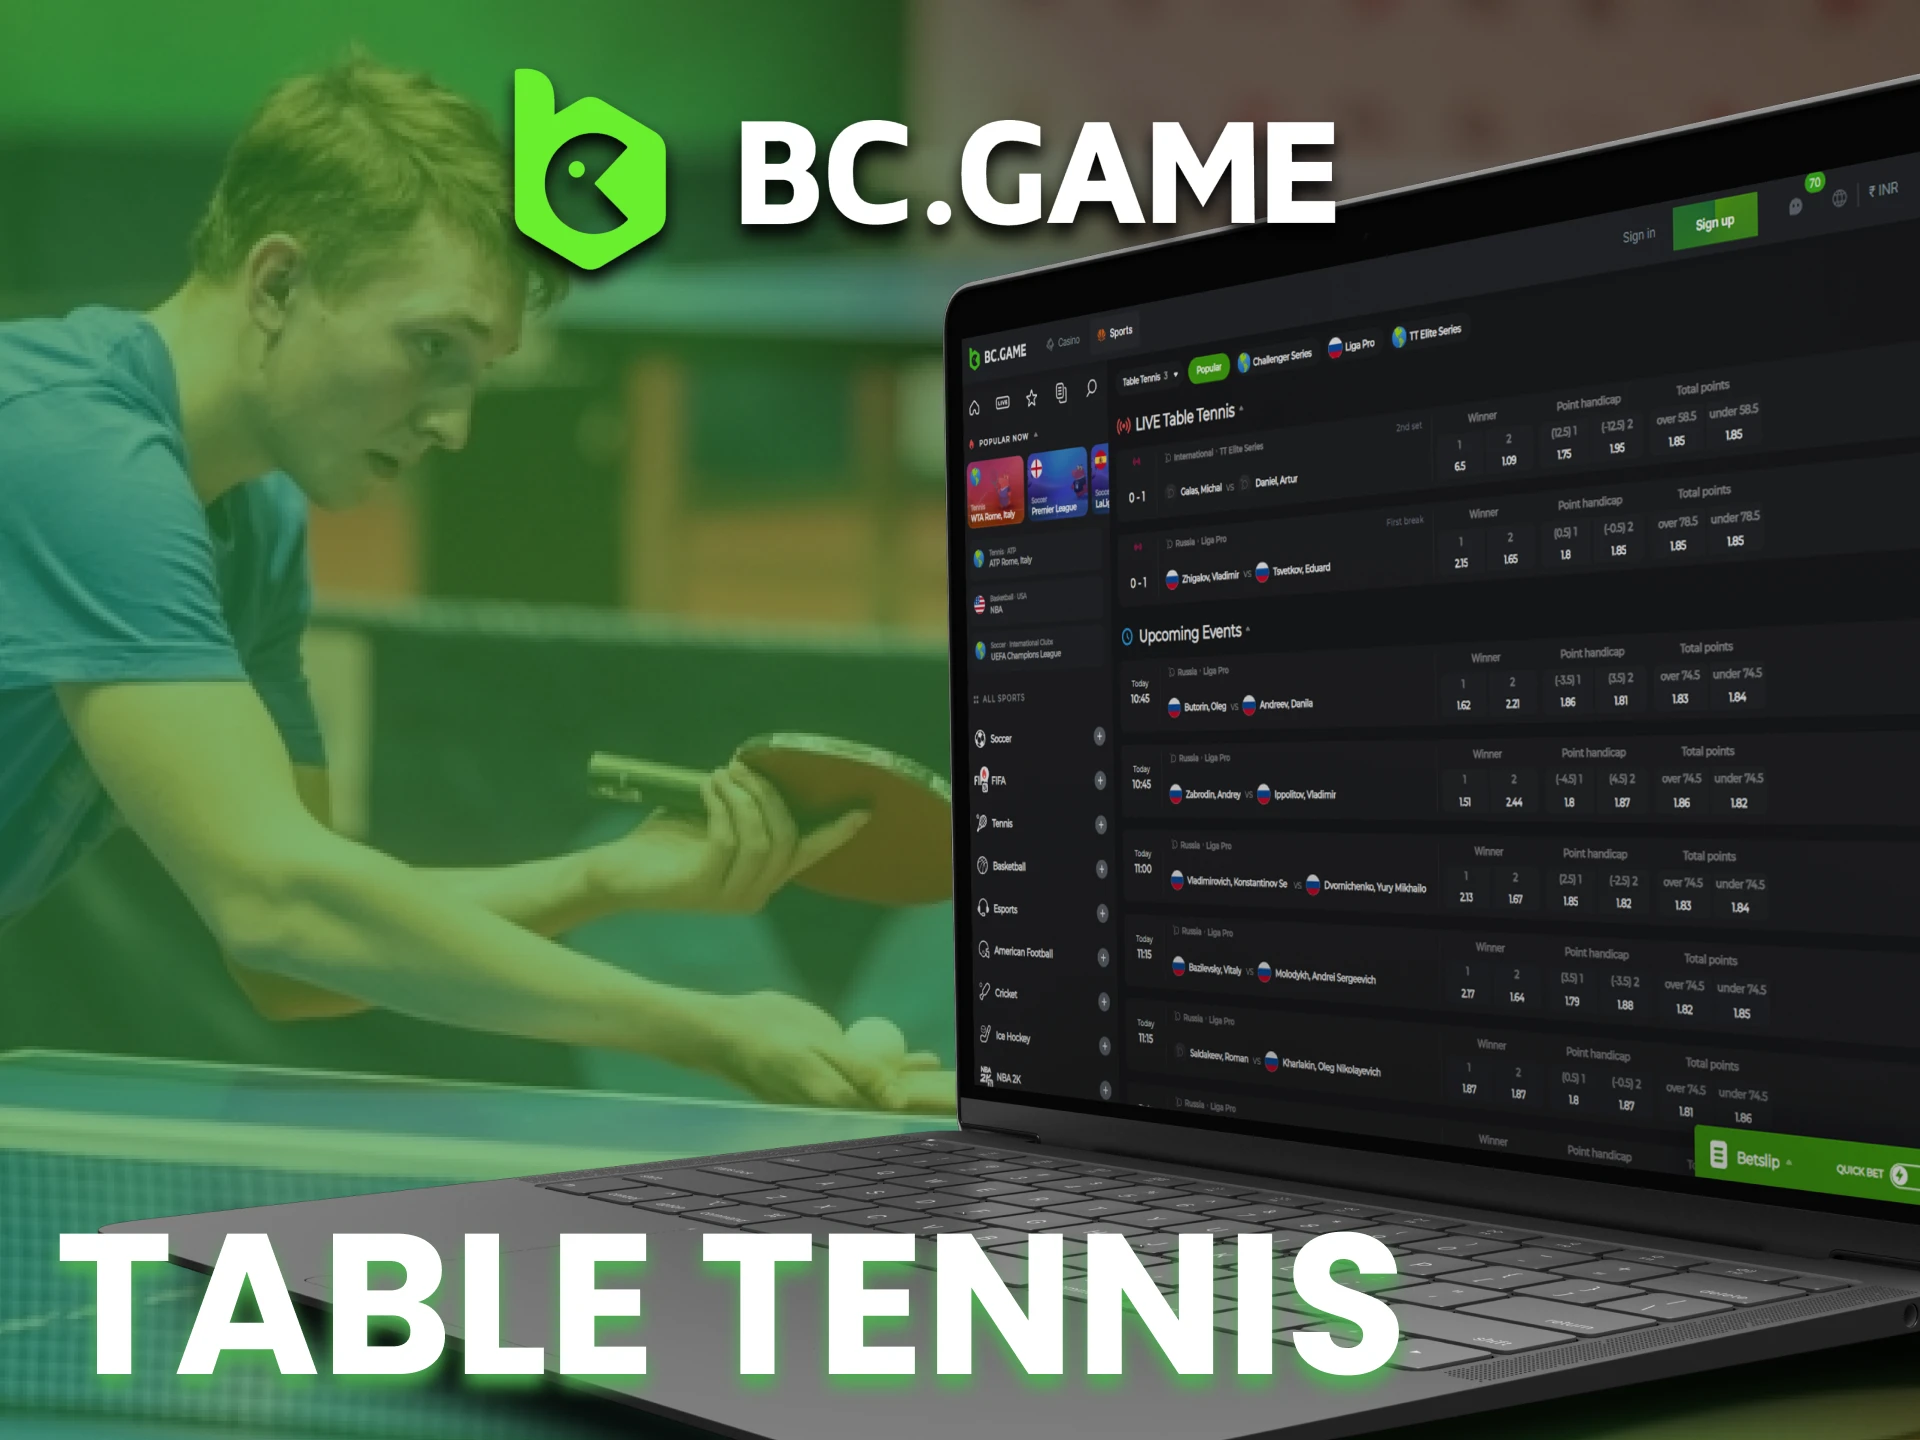 Watch table tennis games at BC Game.